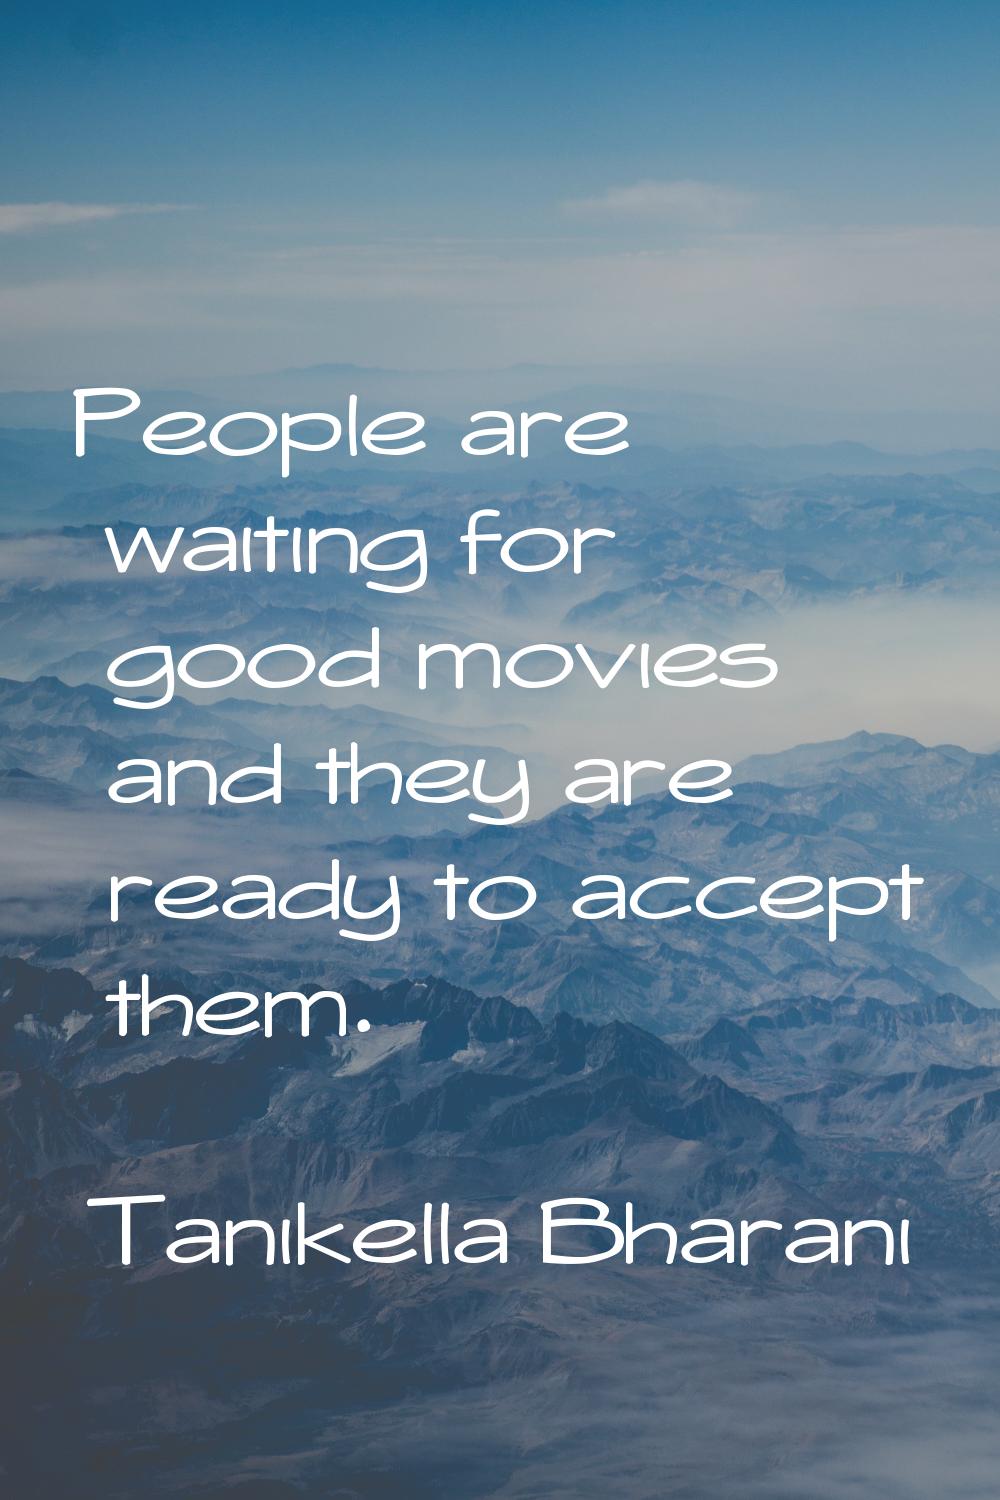 People are waiting for good movies and they are ready to accept them.